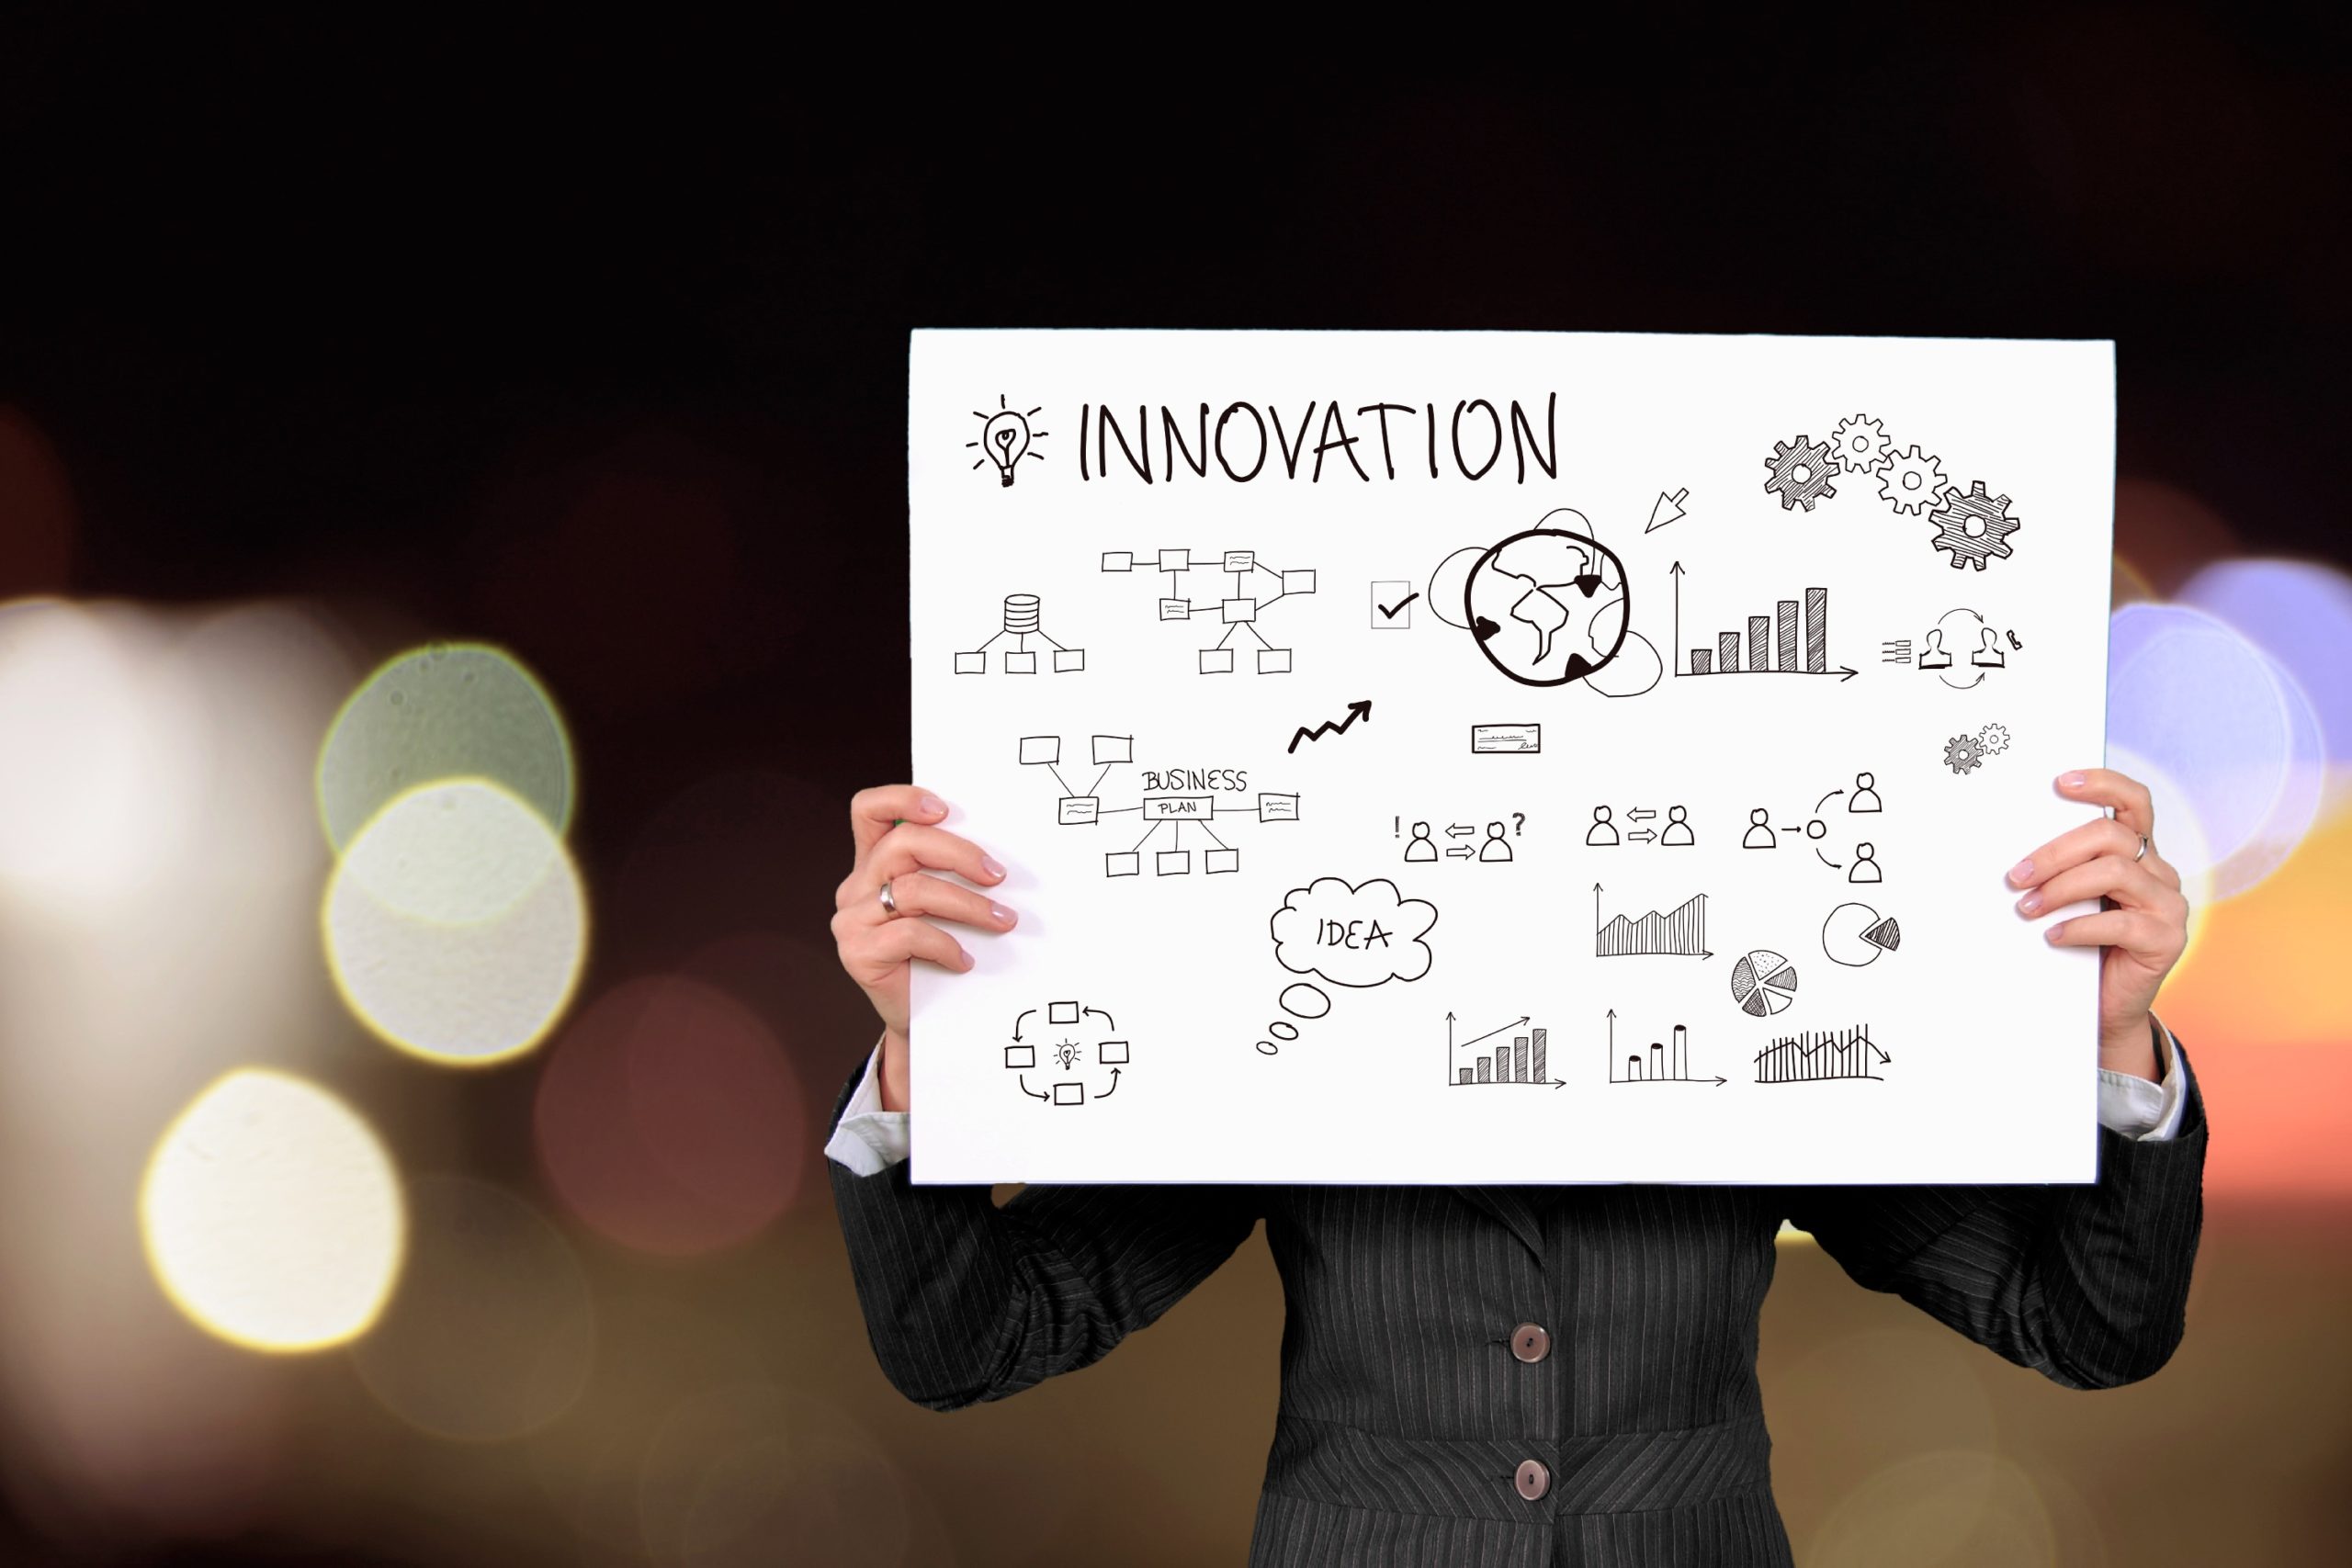 The Best Ways To Improve Innovation With Better Ideation & Insights